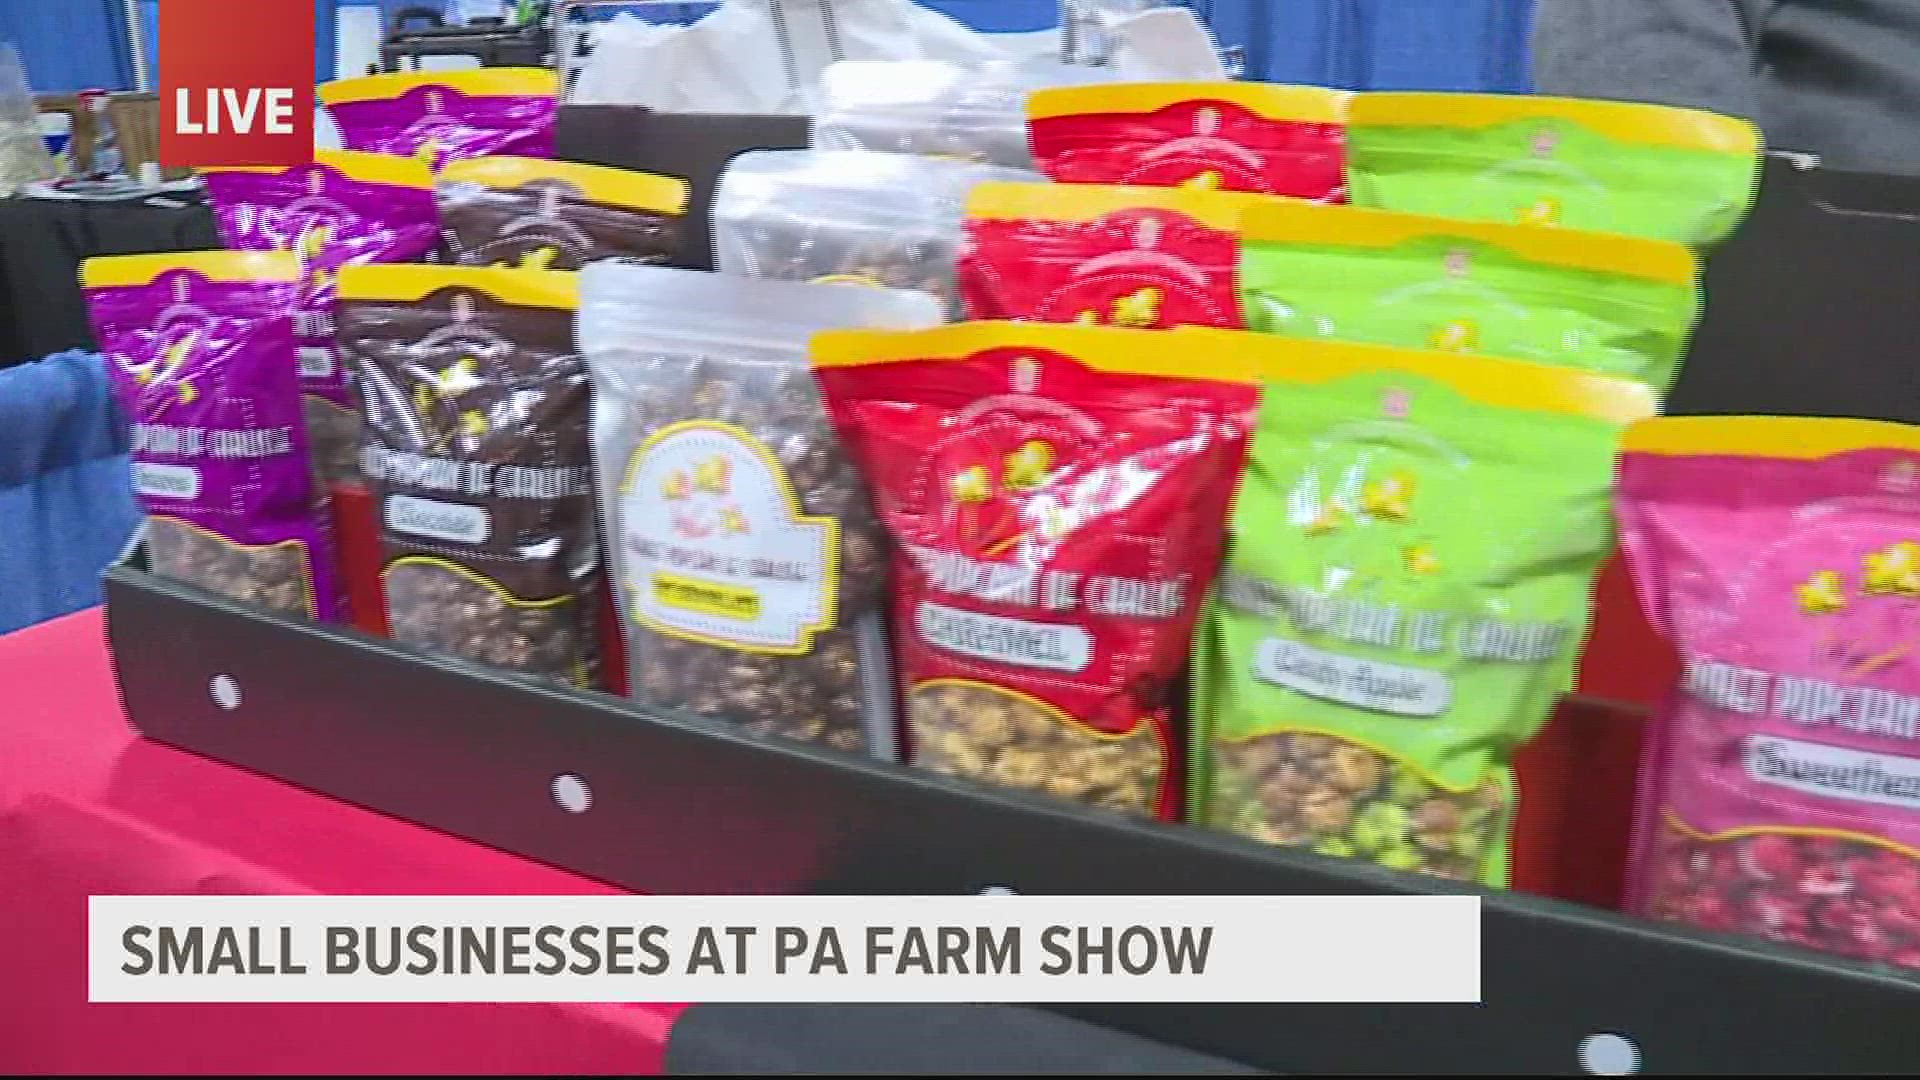 Chris Nelson, owner of Gourmet Popcorn of Carlisle, talks about his experience vending at the Pennsylvania Farm Show.